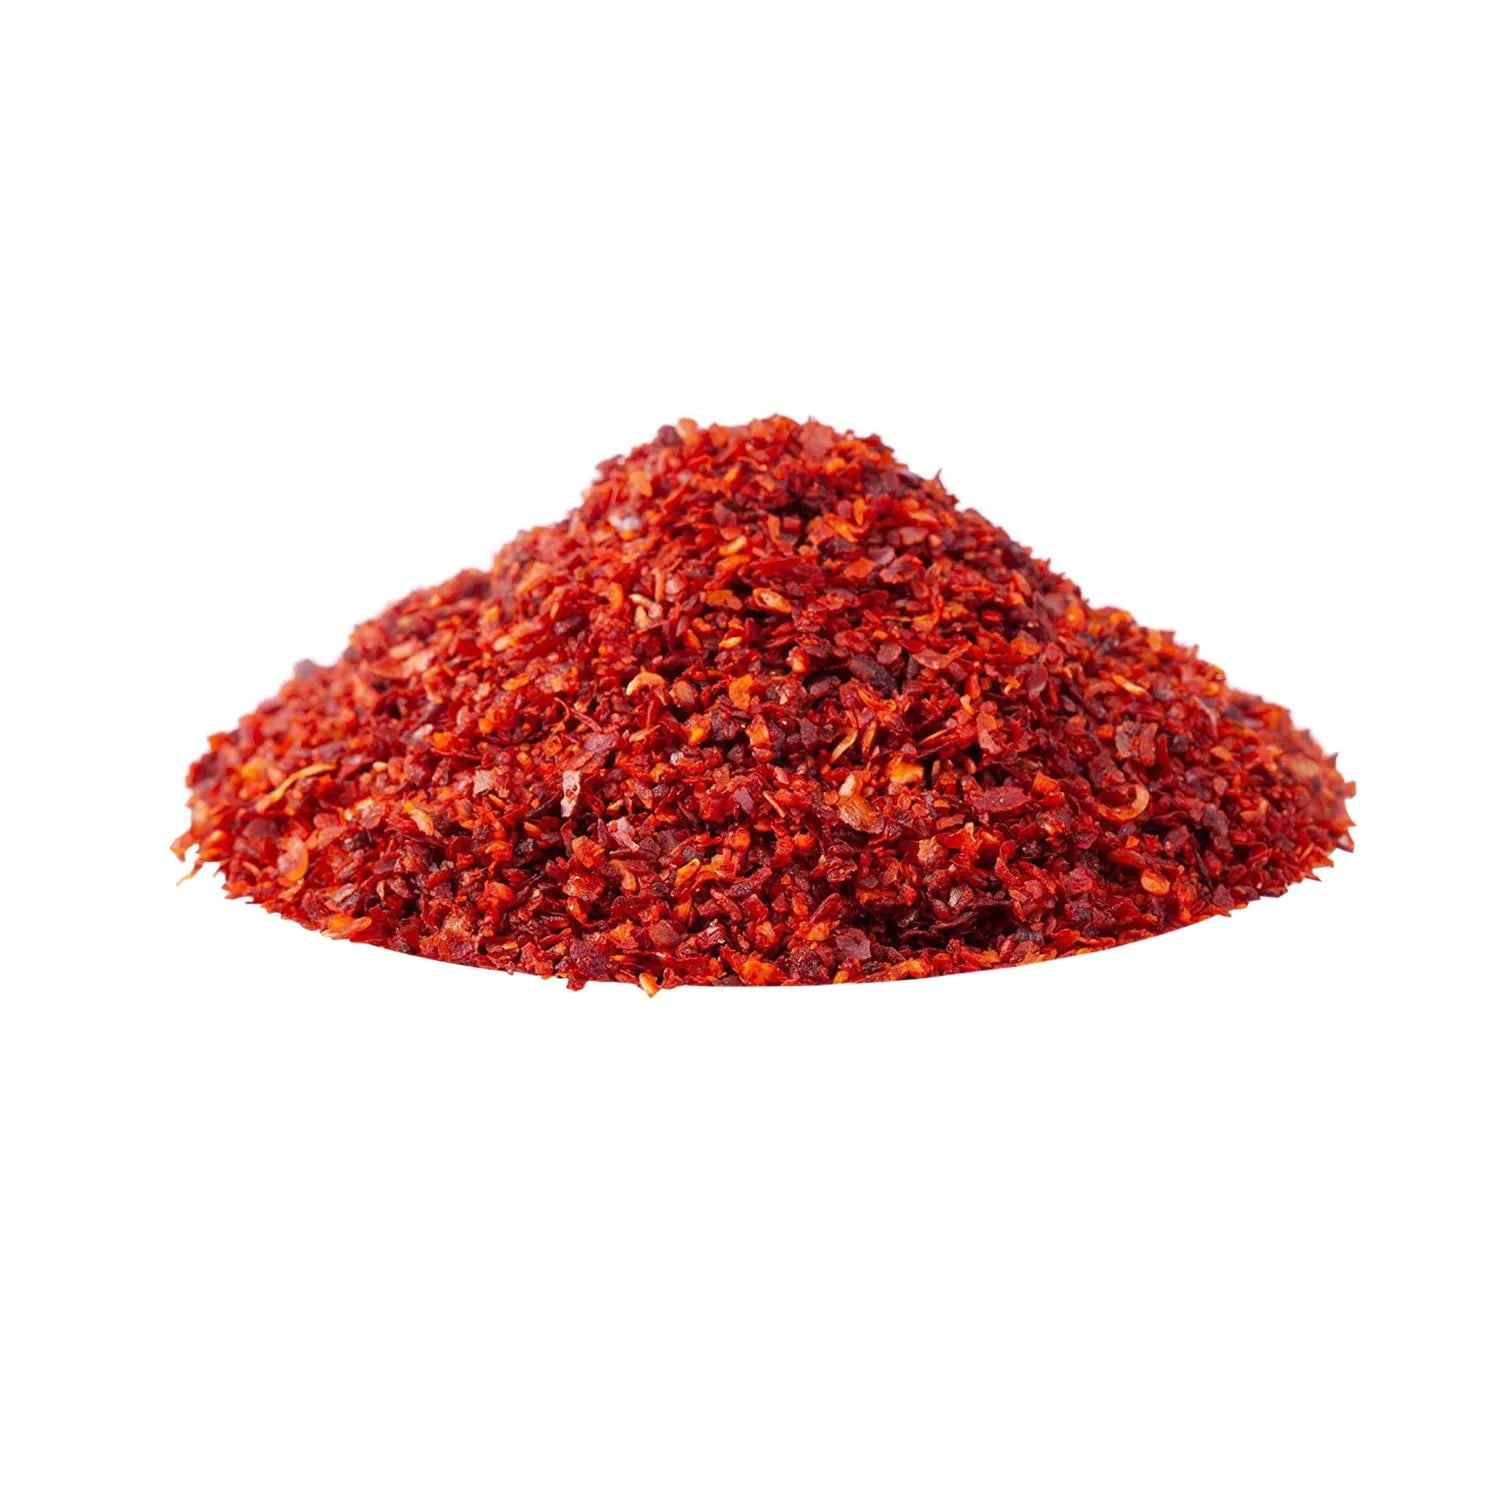 Organic Red Pepper Flakes | 0.19 lb - Spicy and flavorful addition to your dishes.